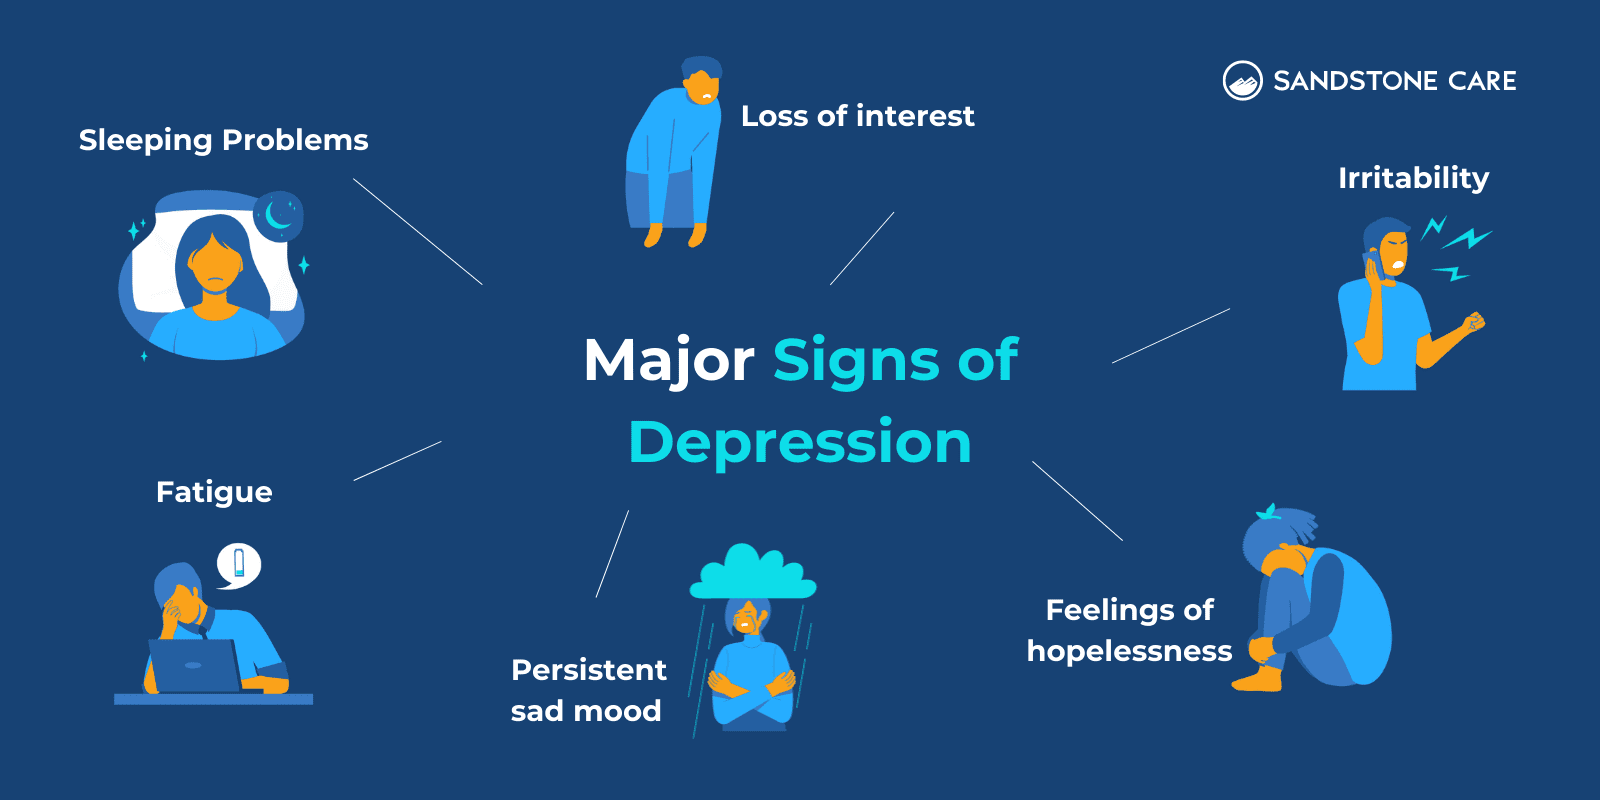 6 Major Signs of Depression represented with graphics in a mindmap style